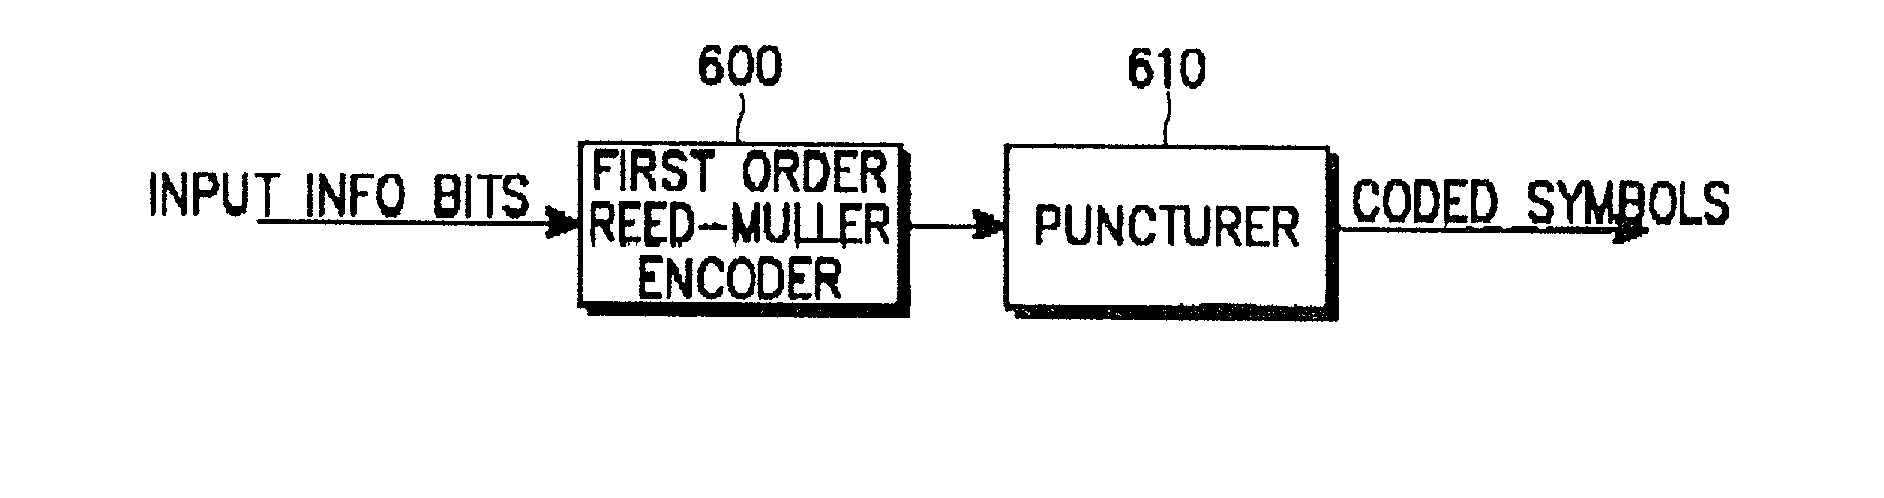 Channel coding/decoding apparatus and method for a CDMA mobile communication system